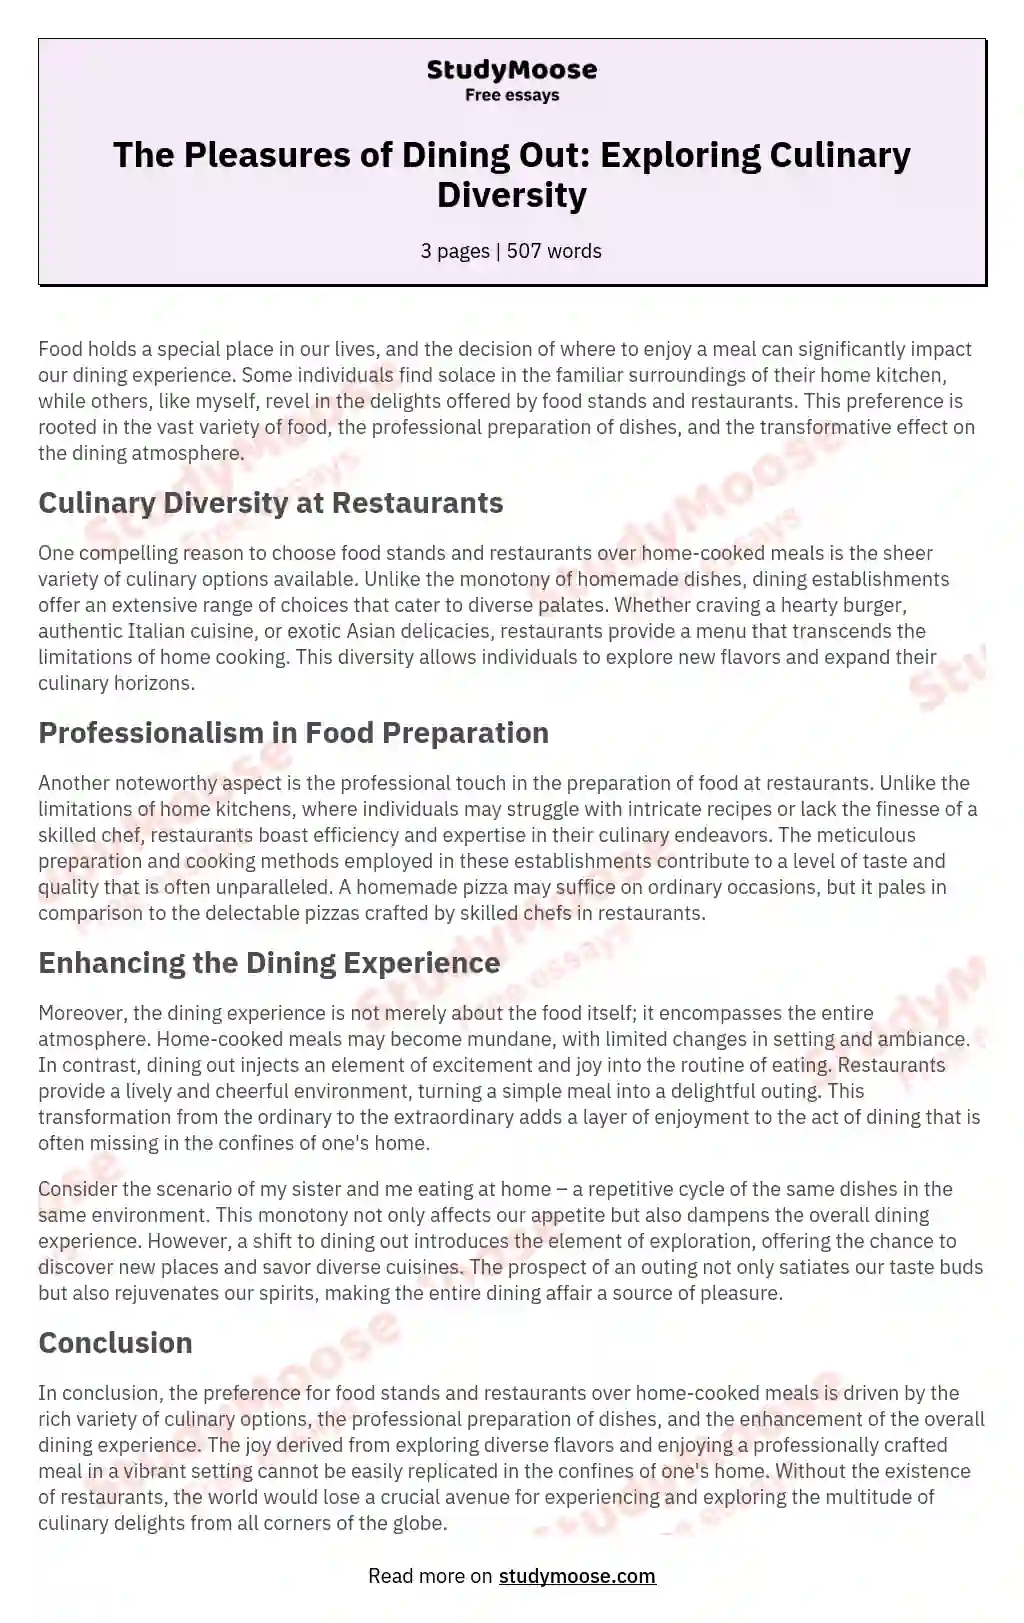 The Pleasures of Dining Out: Exploring Culinary Diversity essay